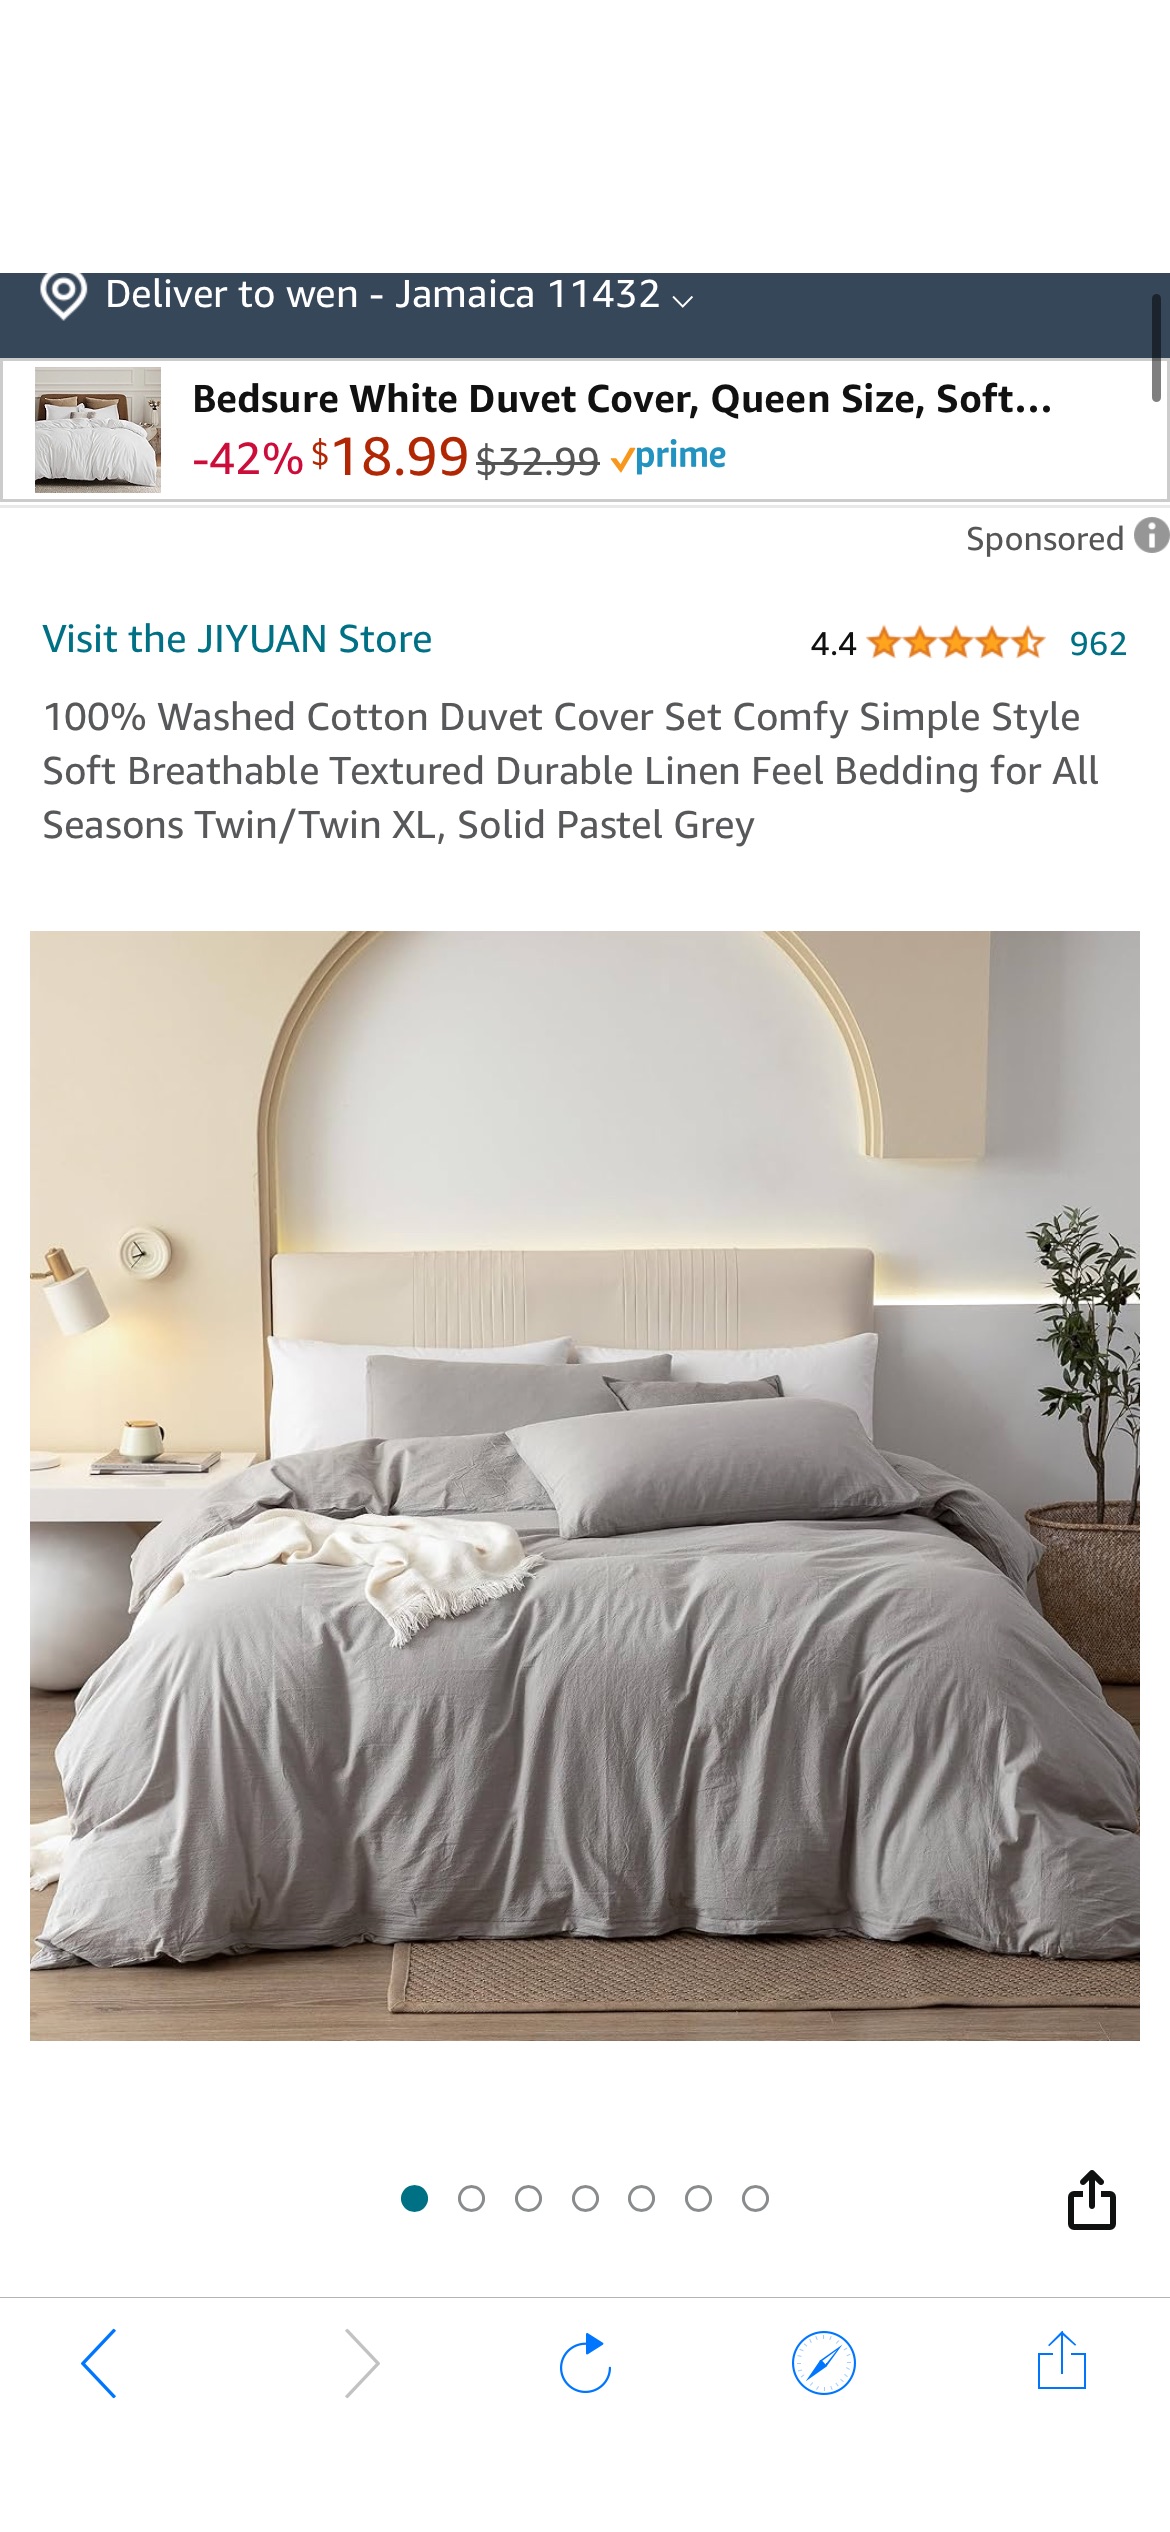 Amazon.com: JIYUAN 100% Washed Cotton Duvet Cover Set Comfy Simple Style Soft Breathable Textured Durable Linen Feel Bedding for All Seasons Twin/Twin XL, Solid Pastel Grey : Home & Kitchen